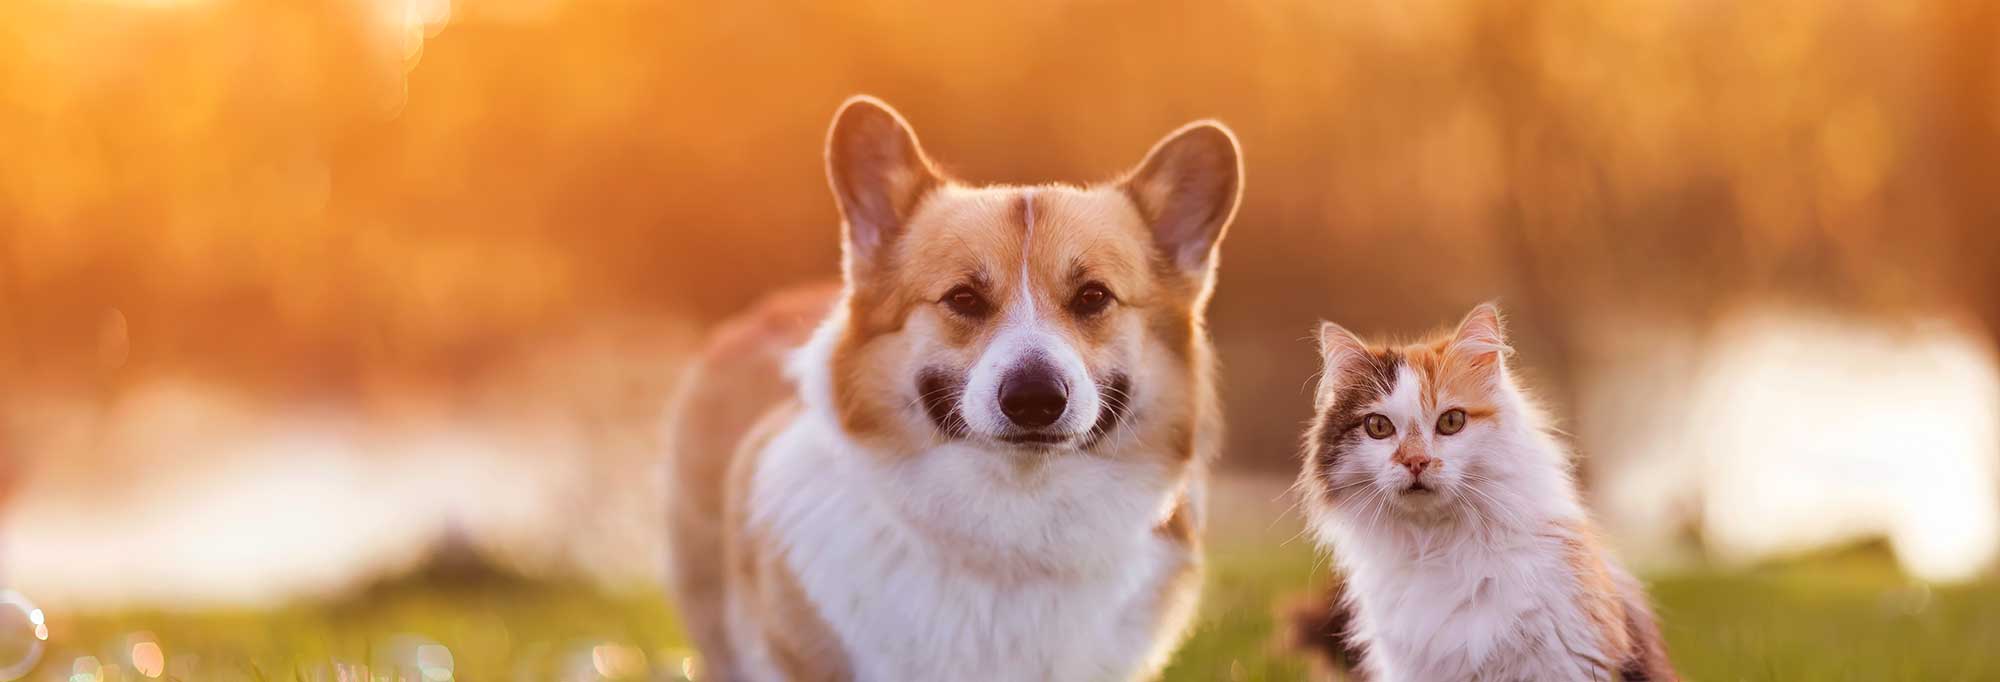 A corgie and cat running in a field